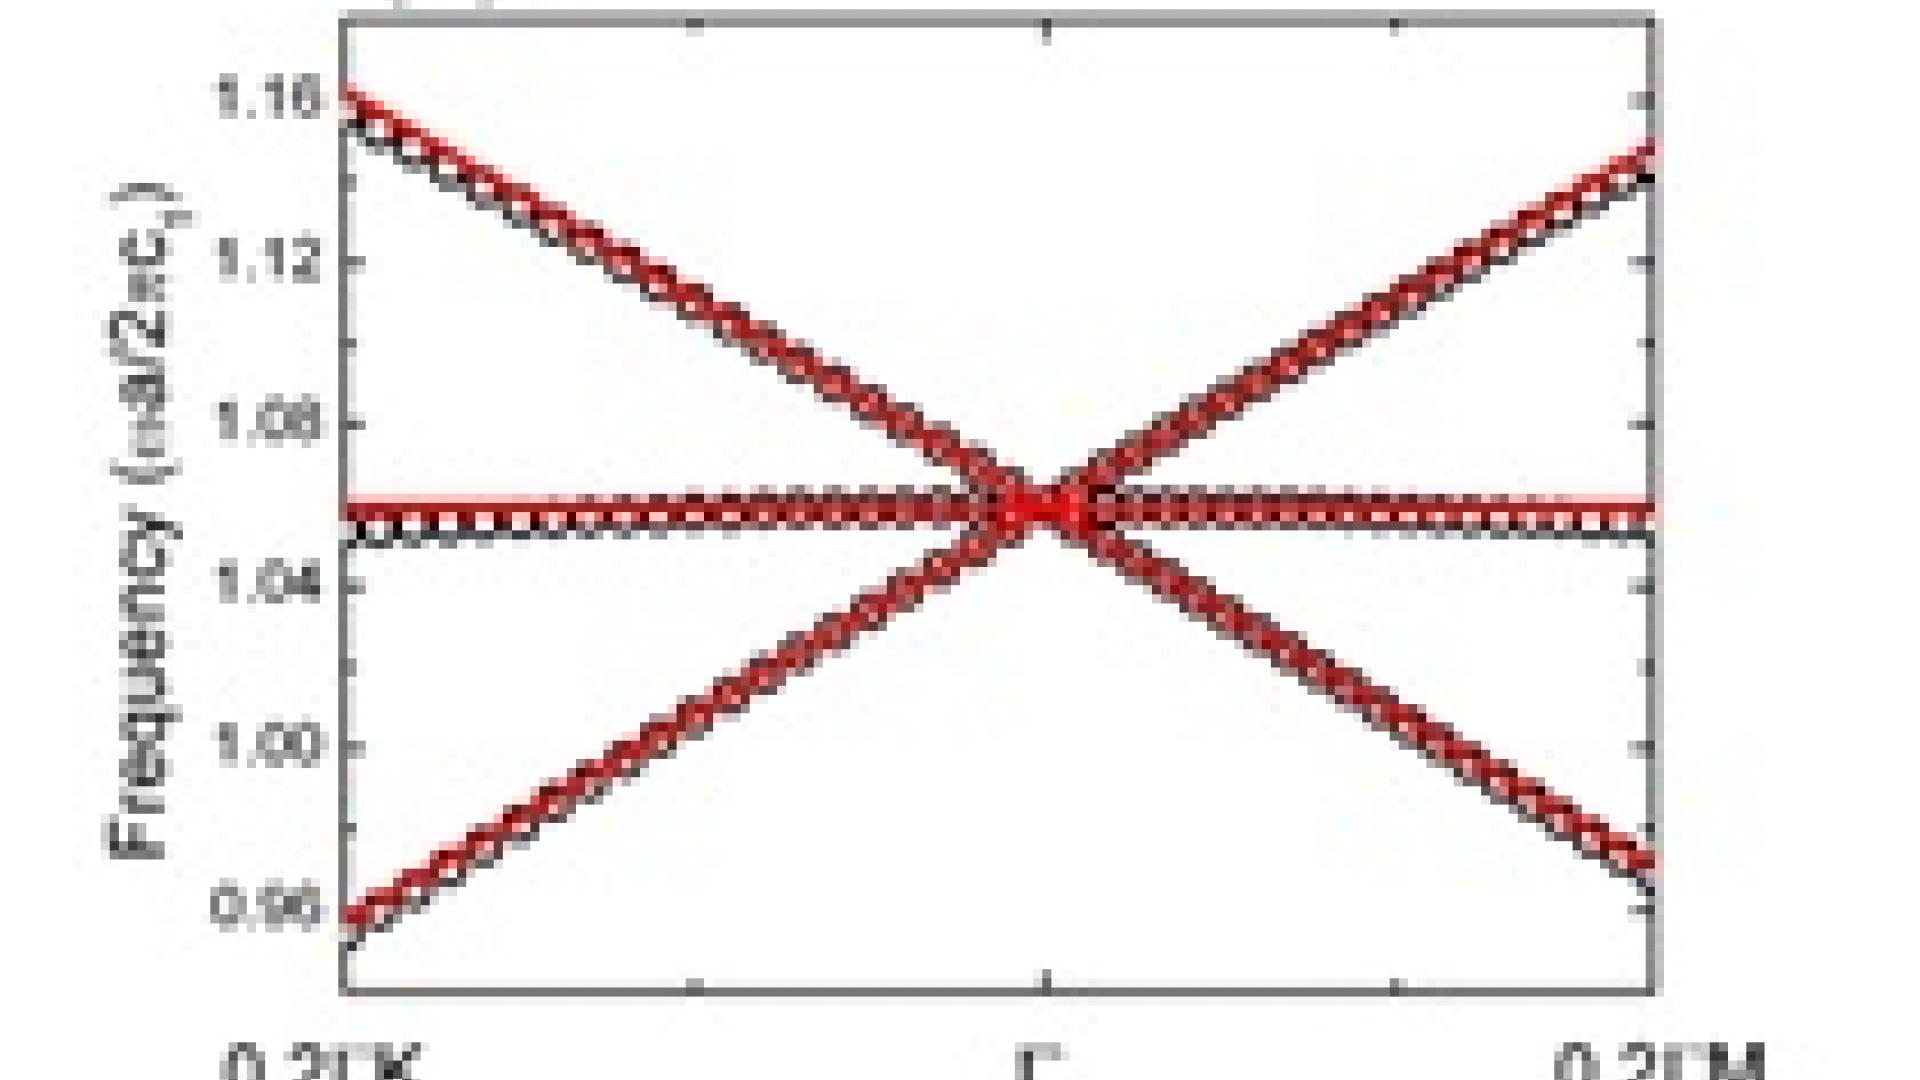 Photonic crystals classical analogue of Dirac cones